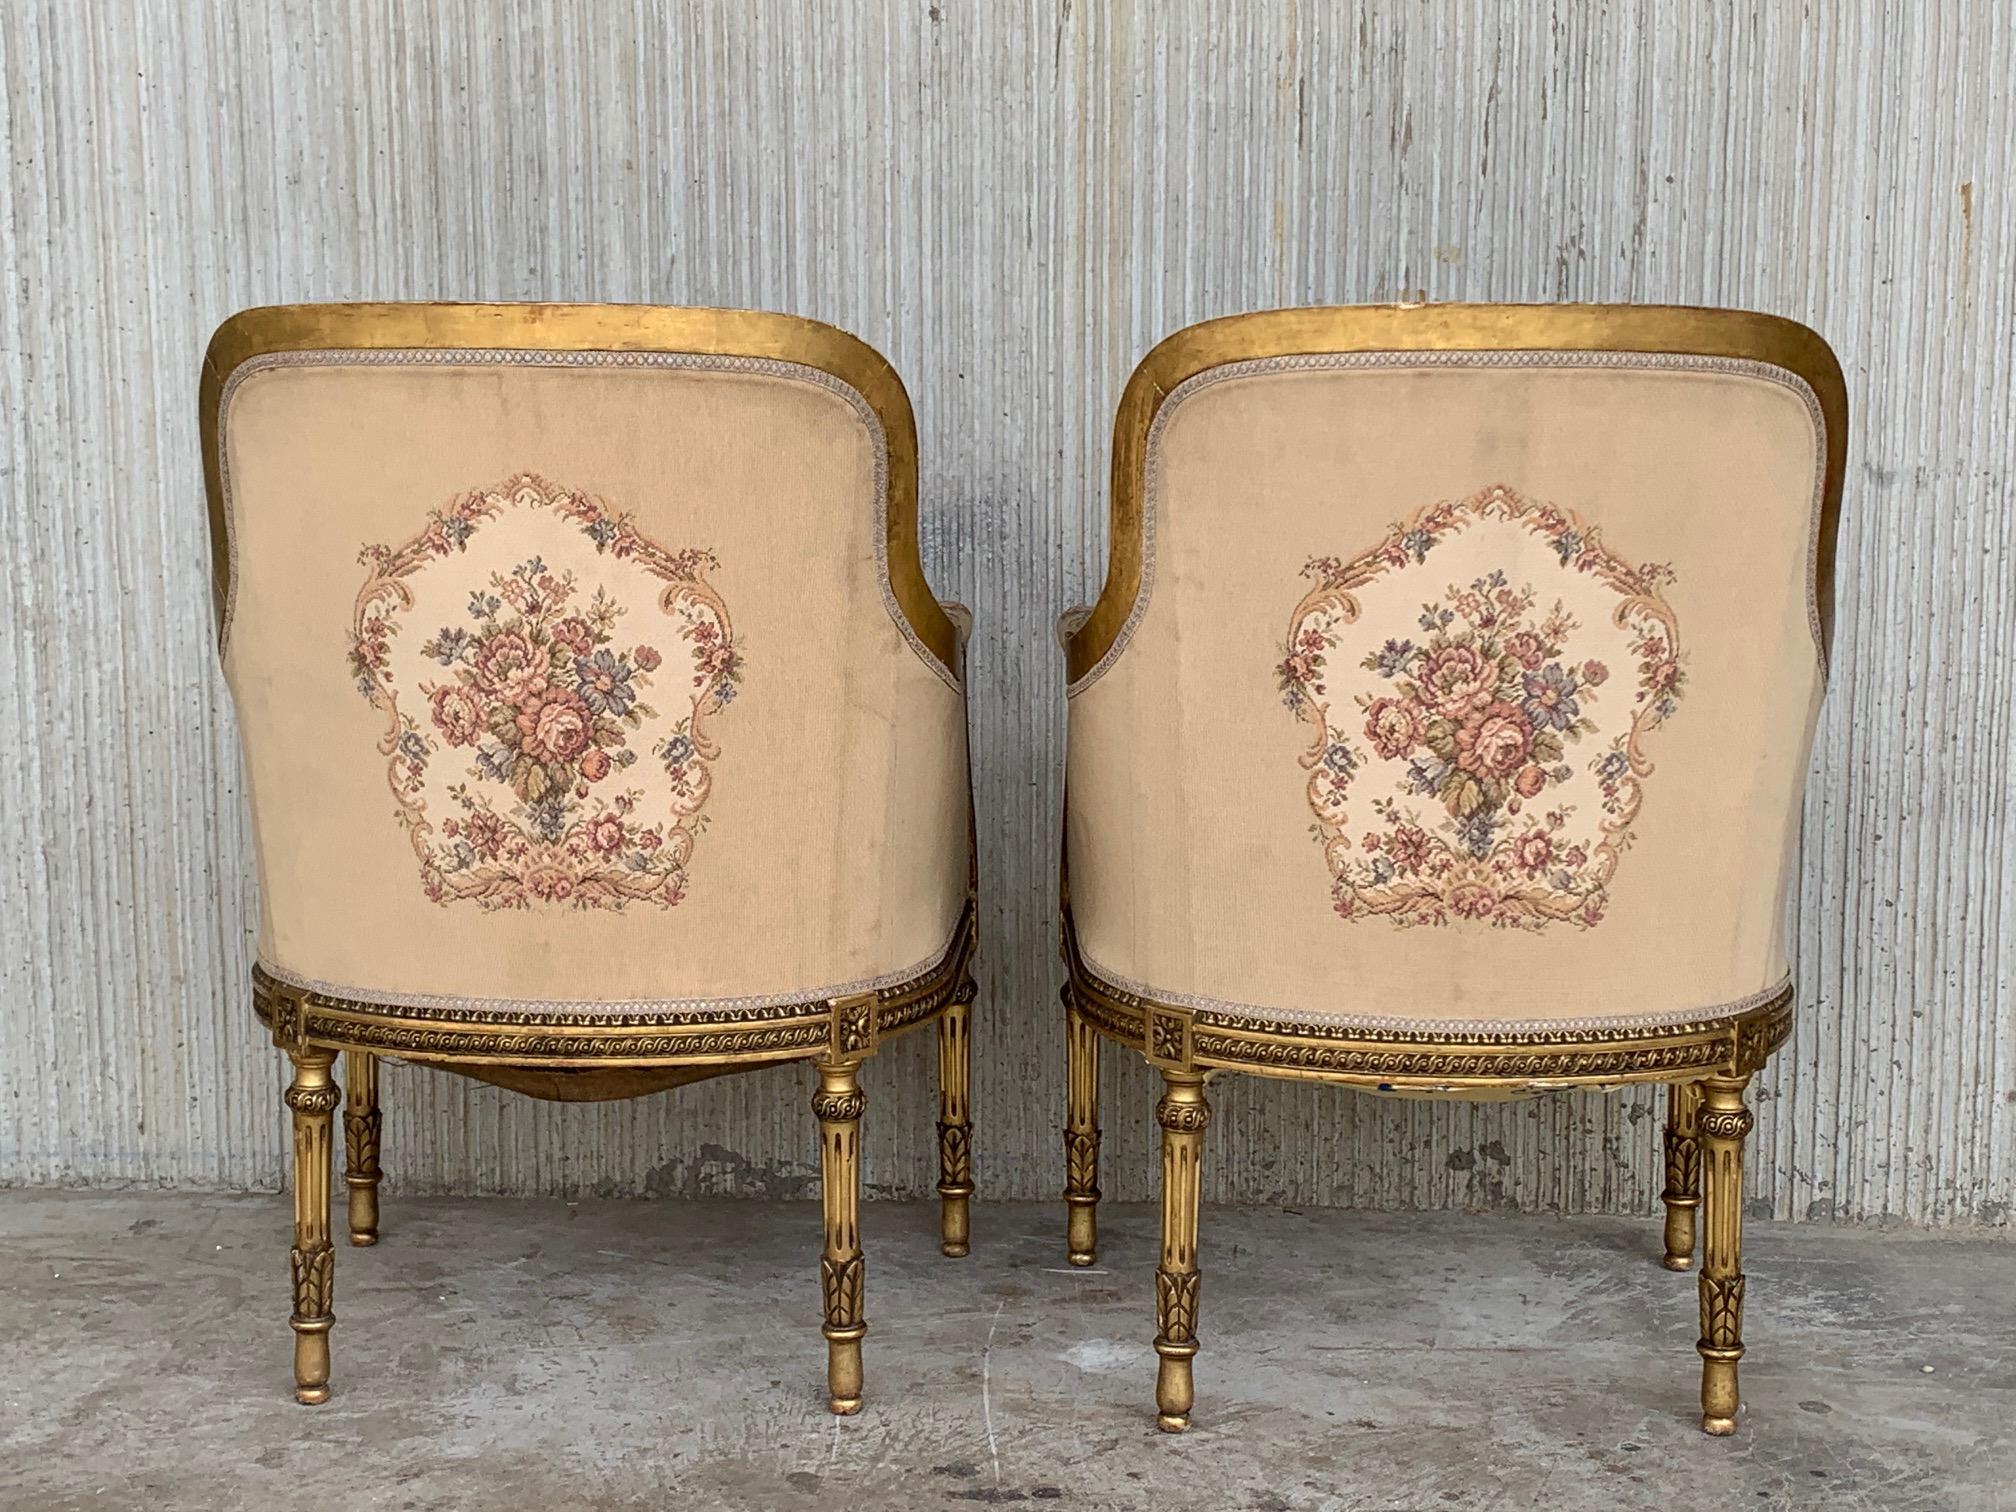 A striking pair of French 19th century Louis XVI giltwood bergères. Each armchair is raised by circular tapered fluted legs below fine block rosettes. Extending along the frieze are impressive and wonderfully carved interlocking patterns centering a